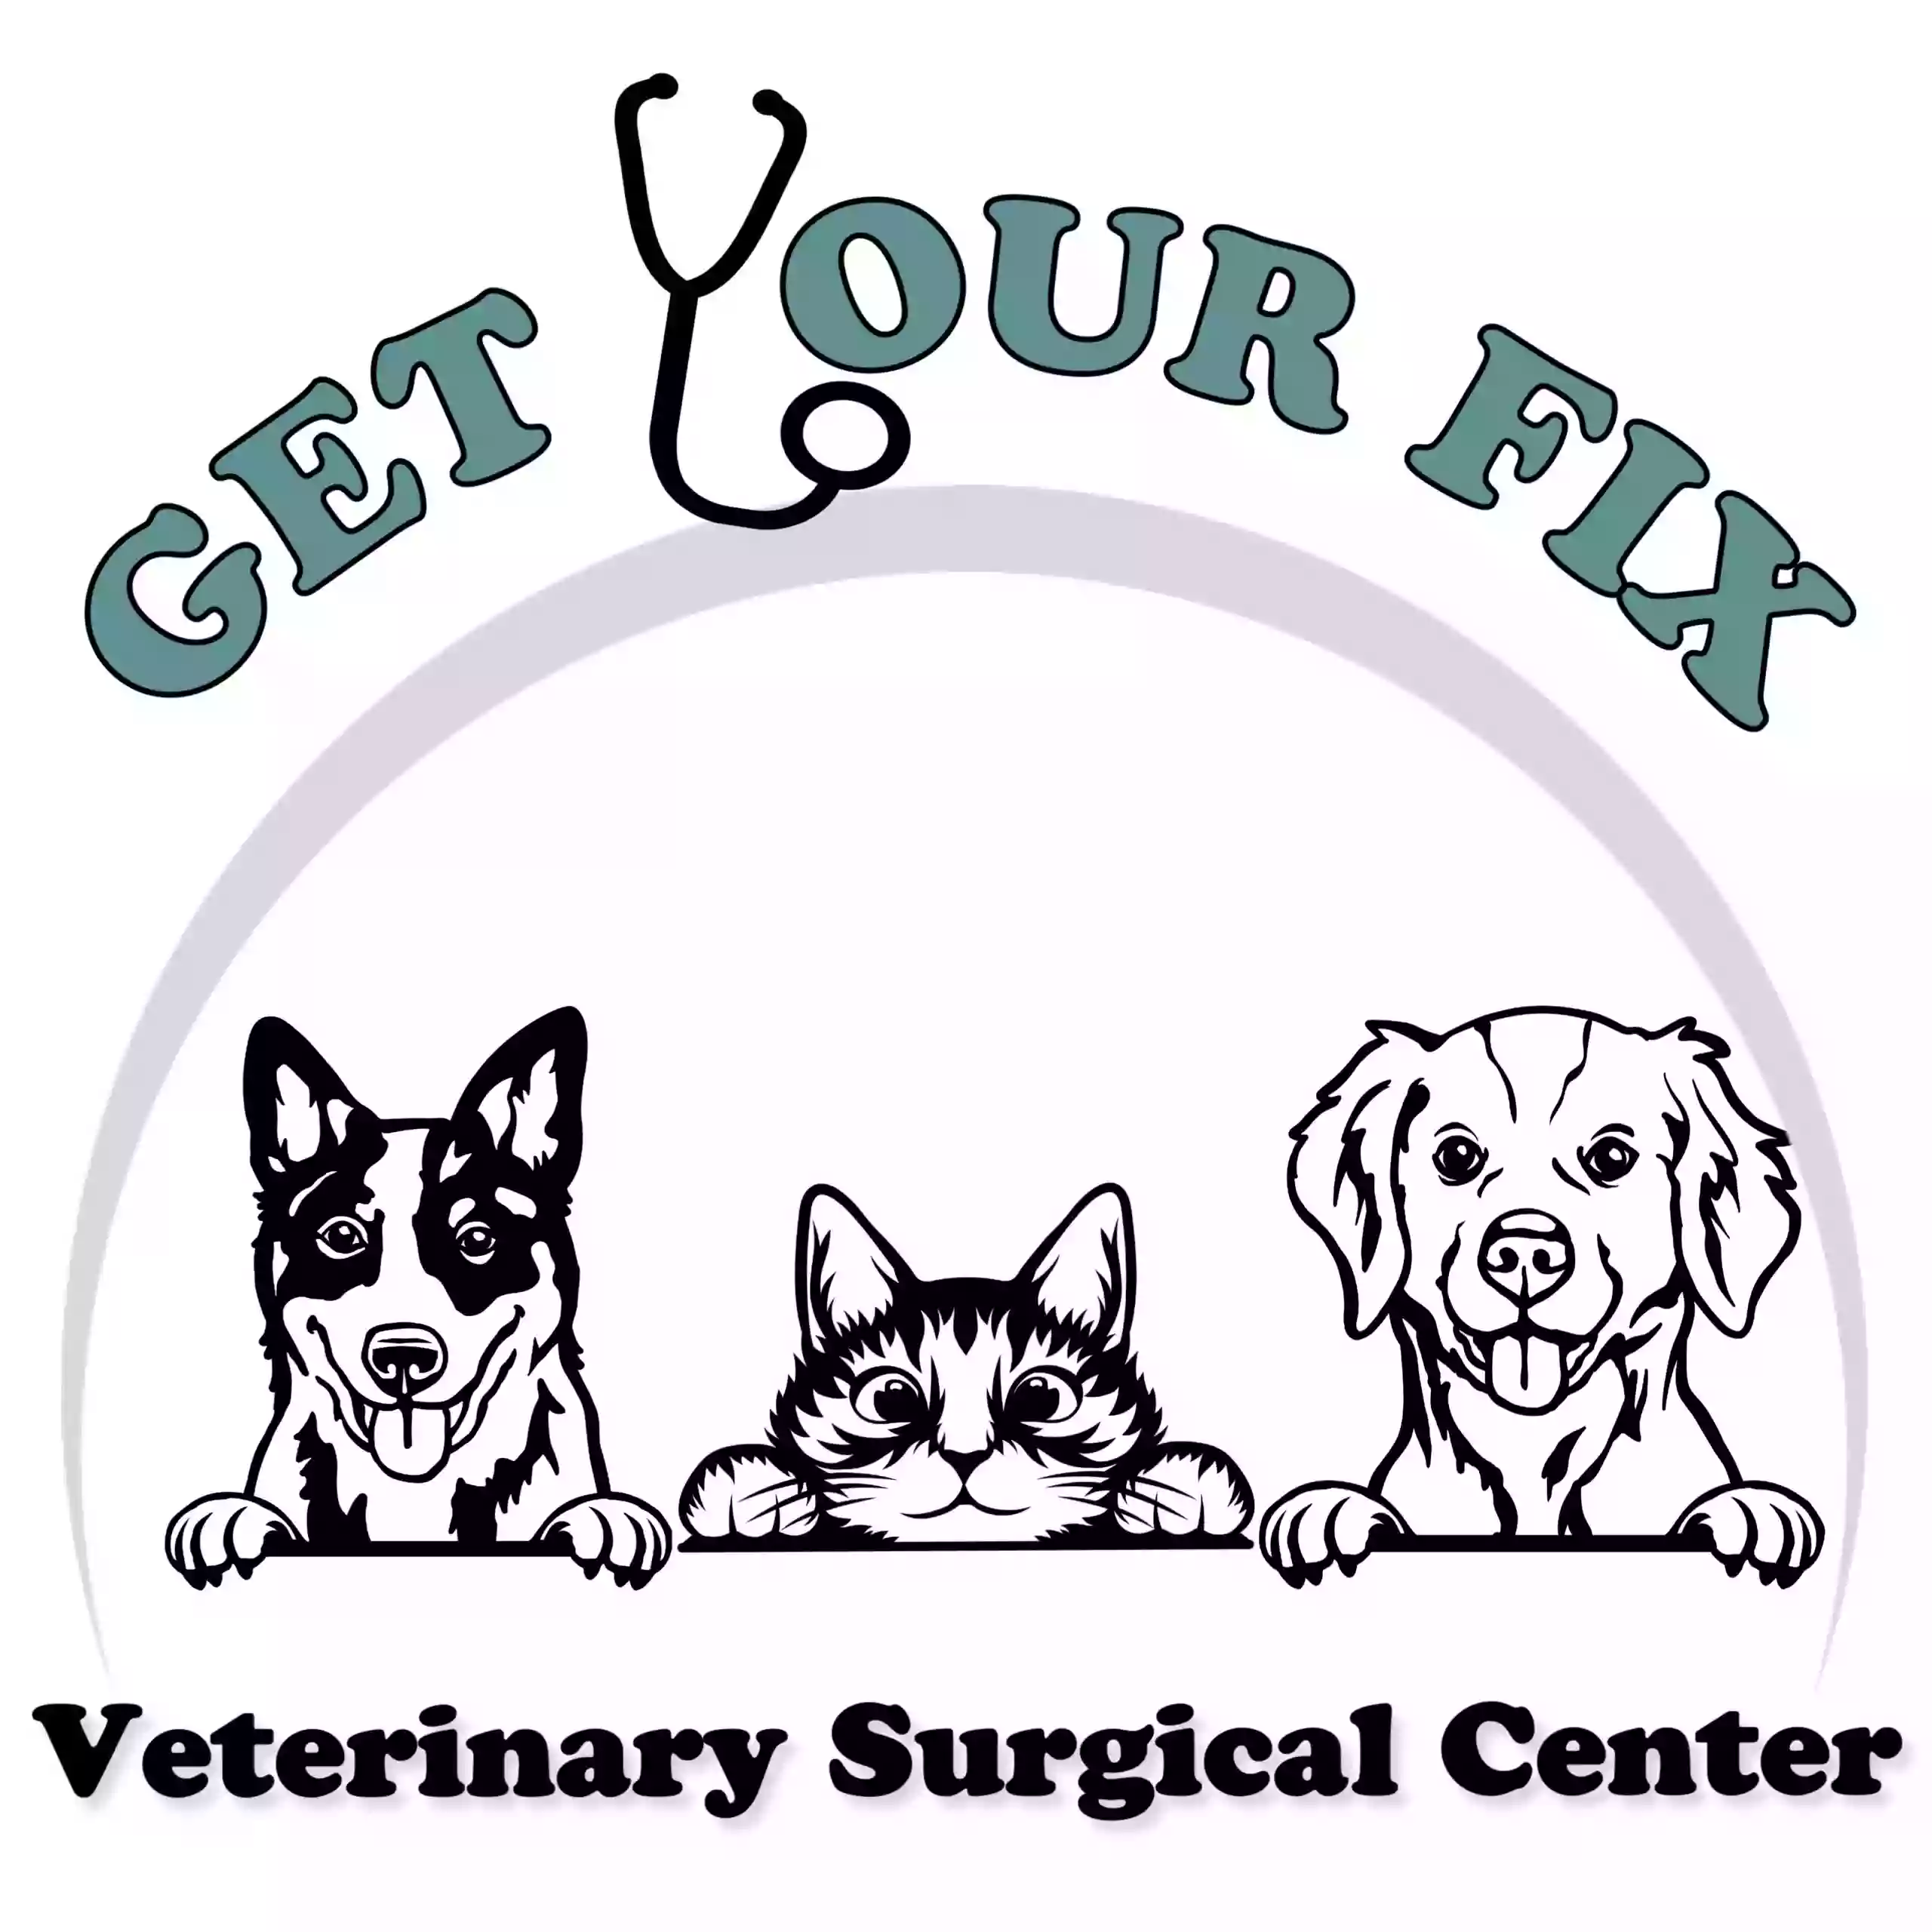 Get Your Fix Veterinary Surgical Center